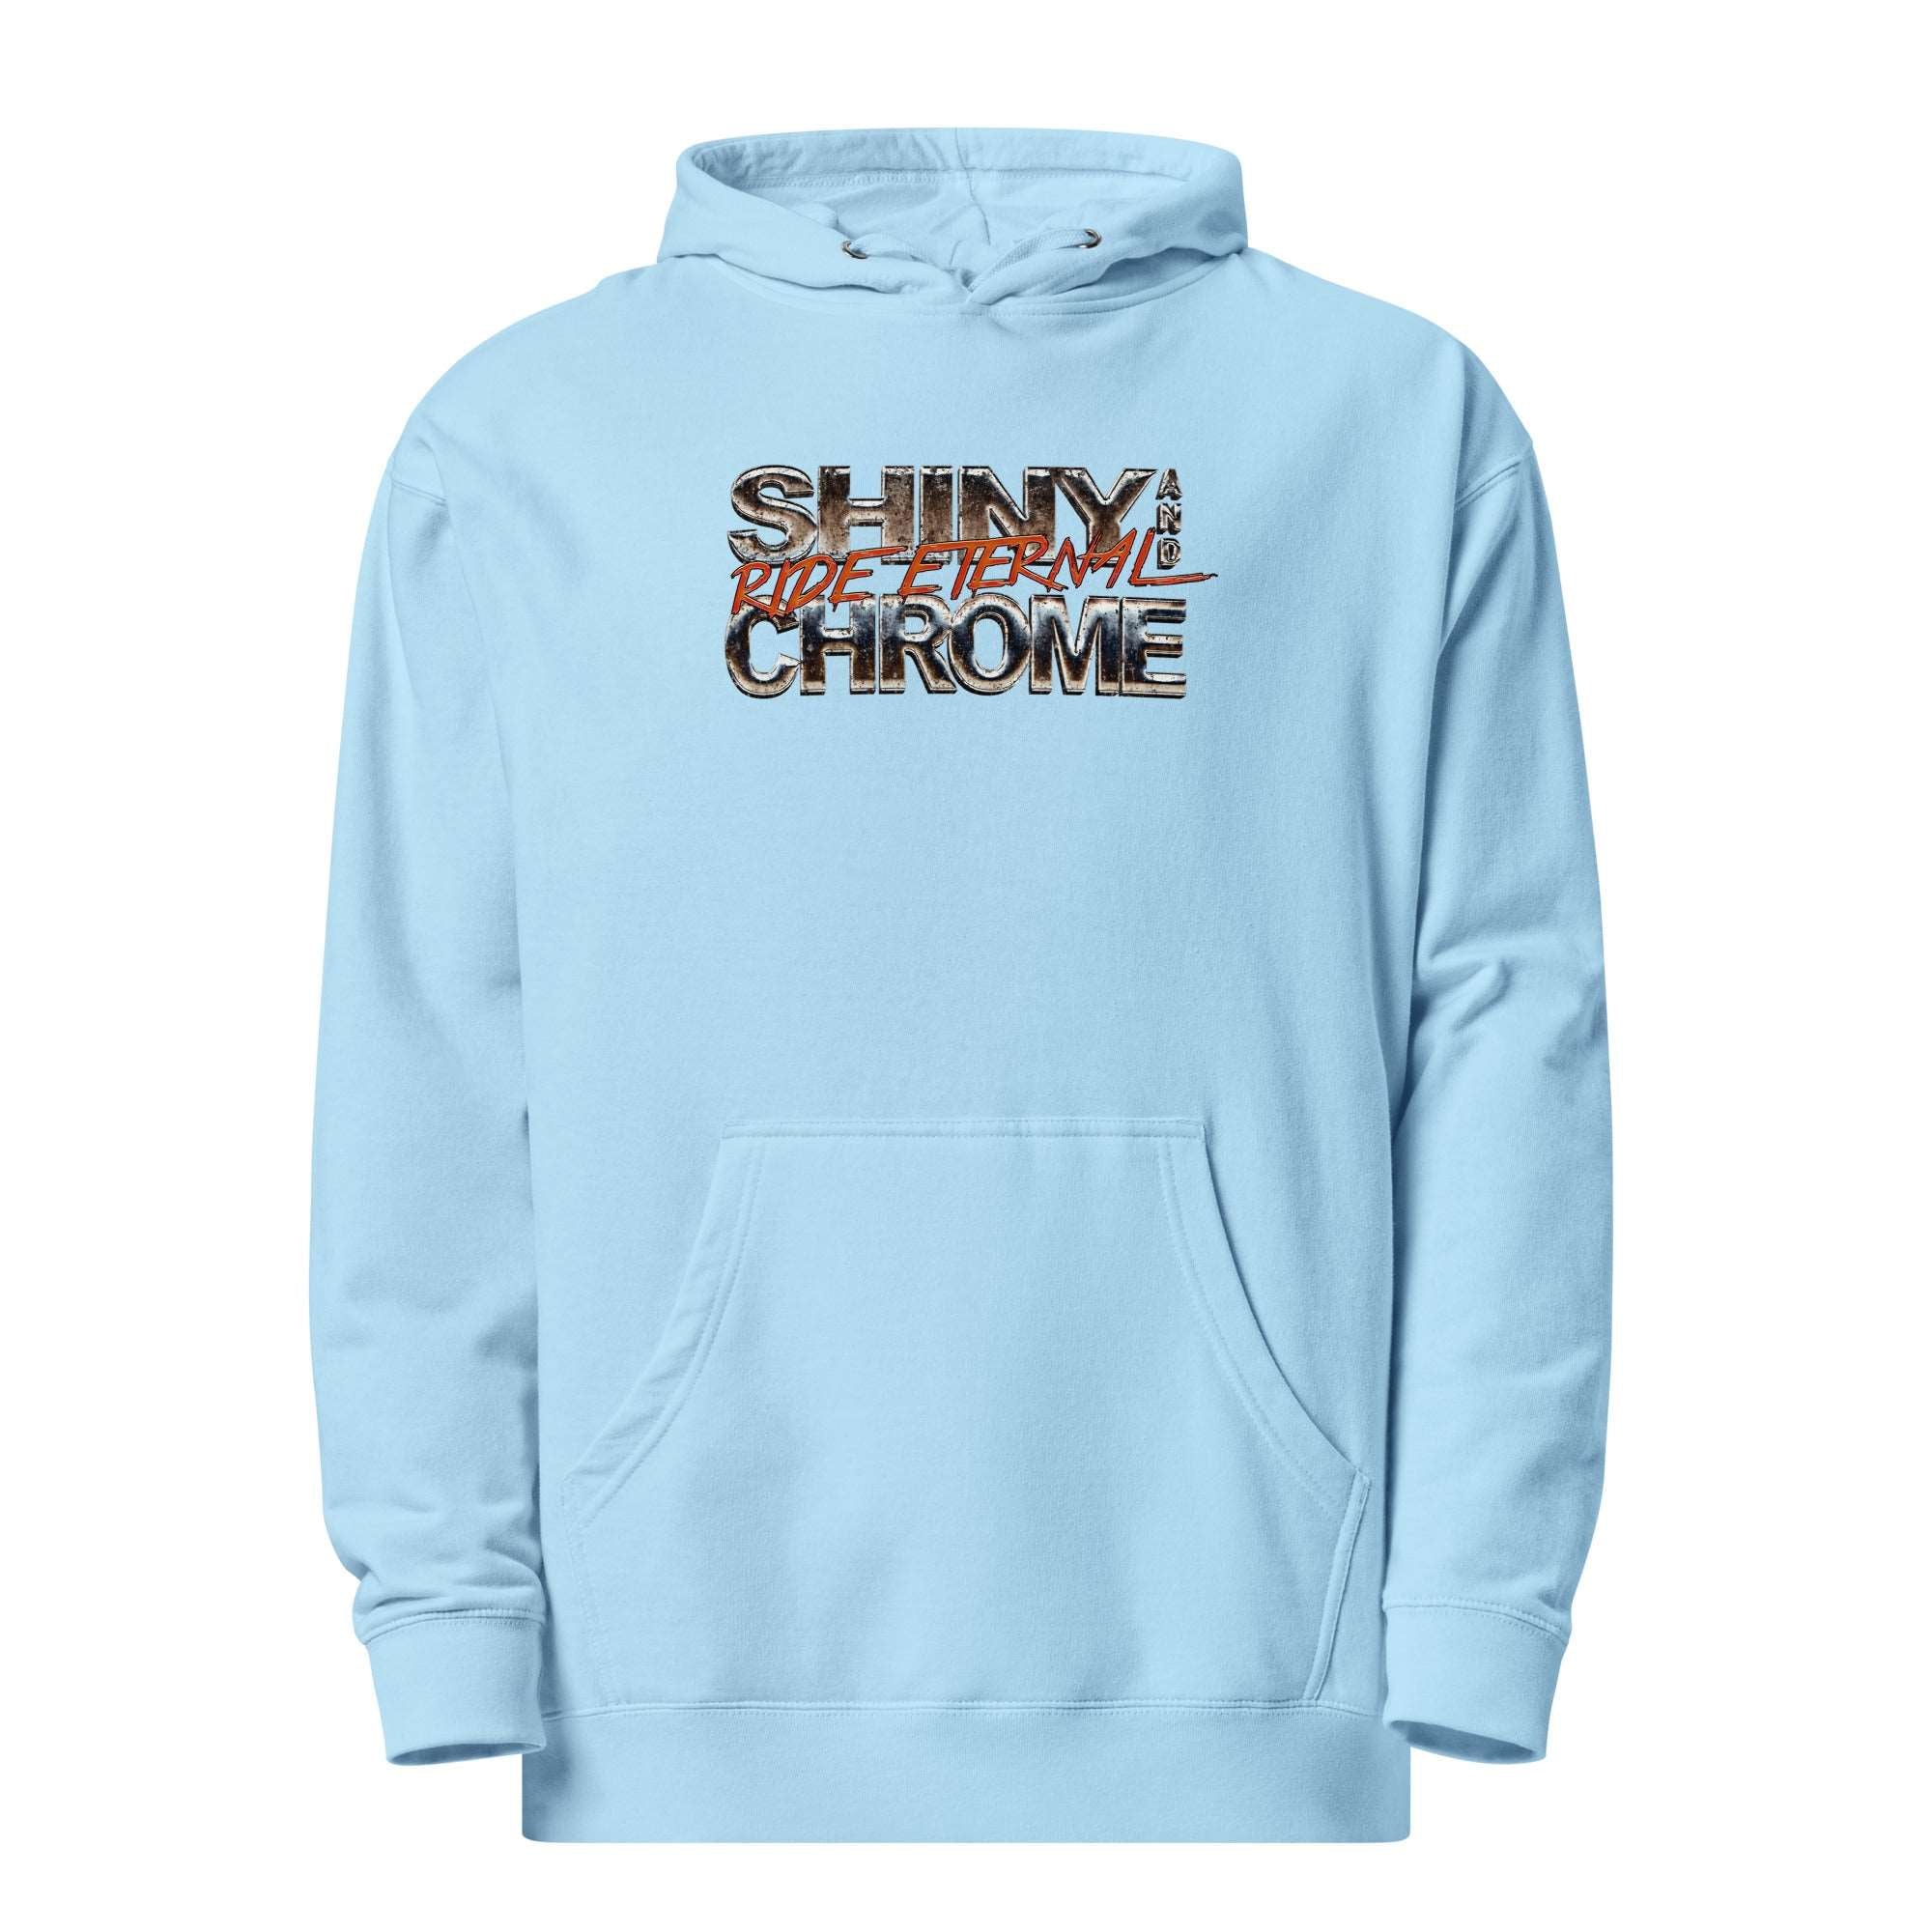 Shiny and Chrome Unisex midweight hoodie